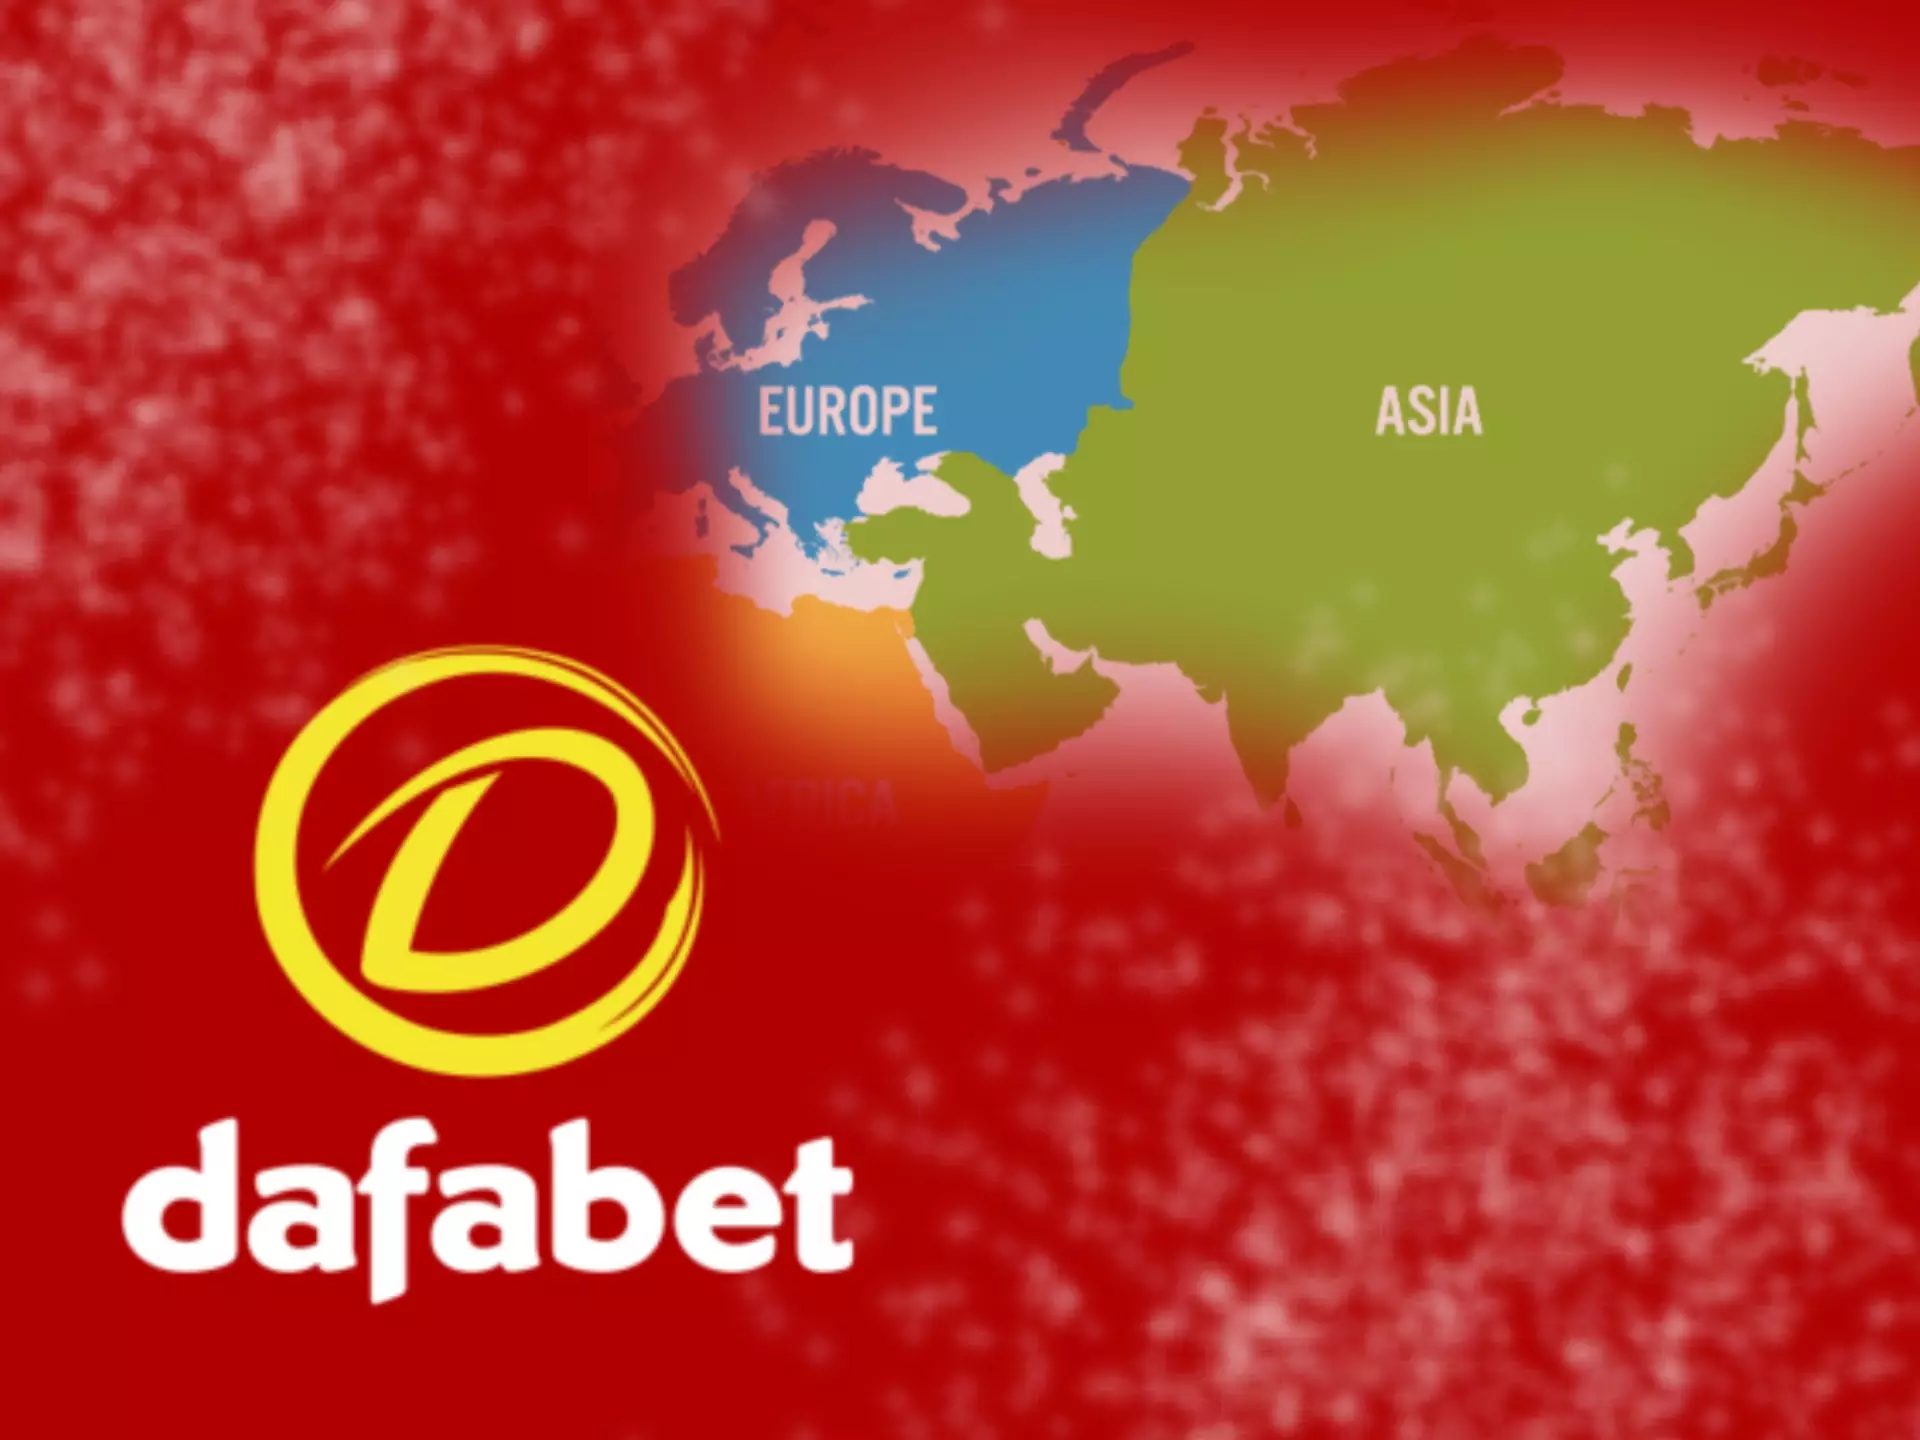 Betting on Dafabet is absolutely legal for Indian players.